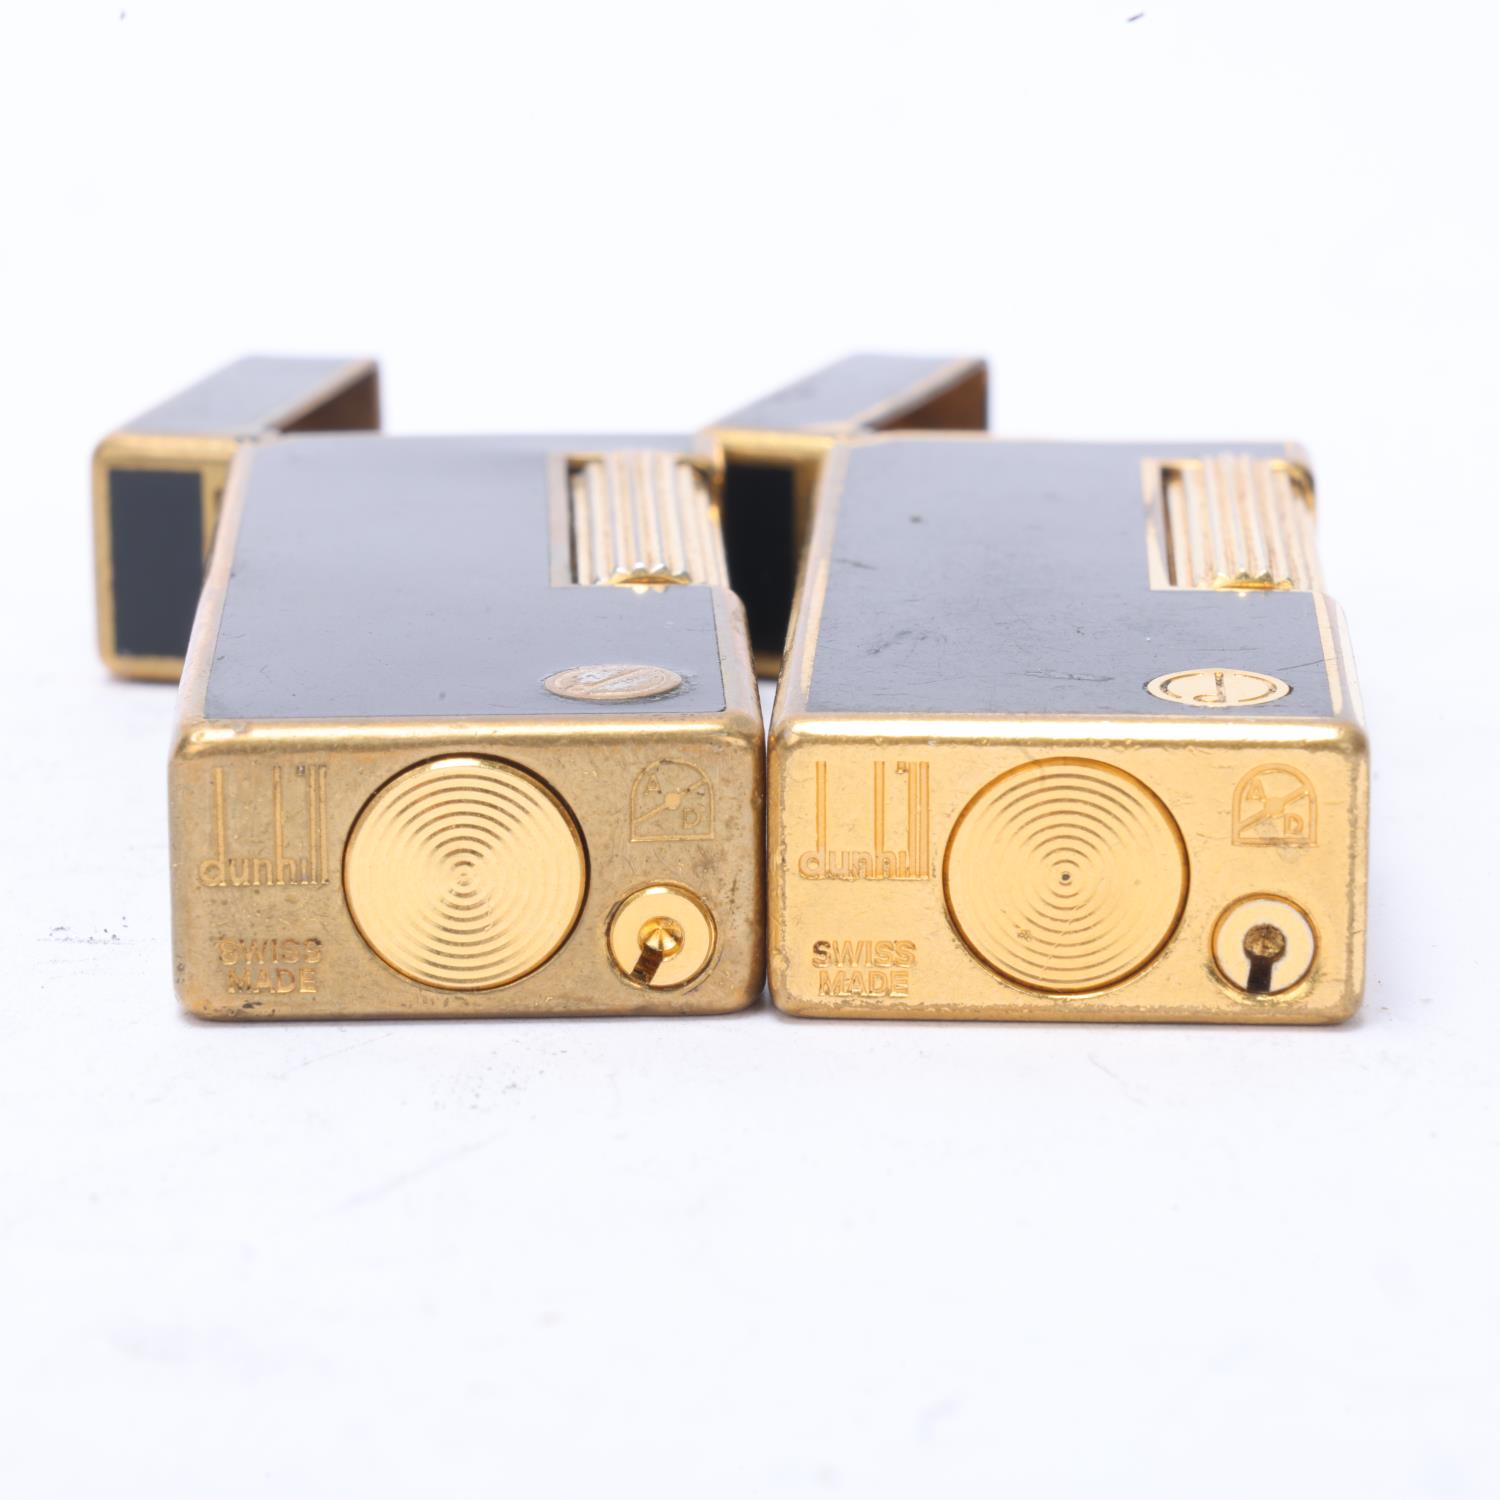 2 vintage Dunhill Rollagas lighters, gold plated and black lacquer bodies, makers marks to base, - Image 3 of 4